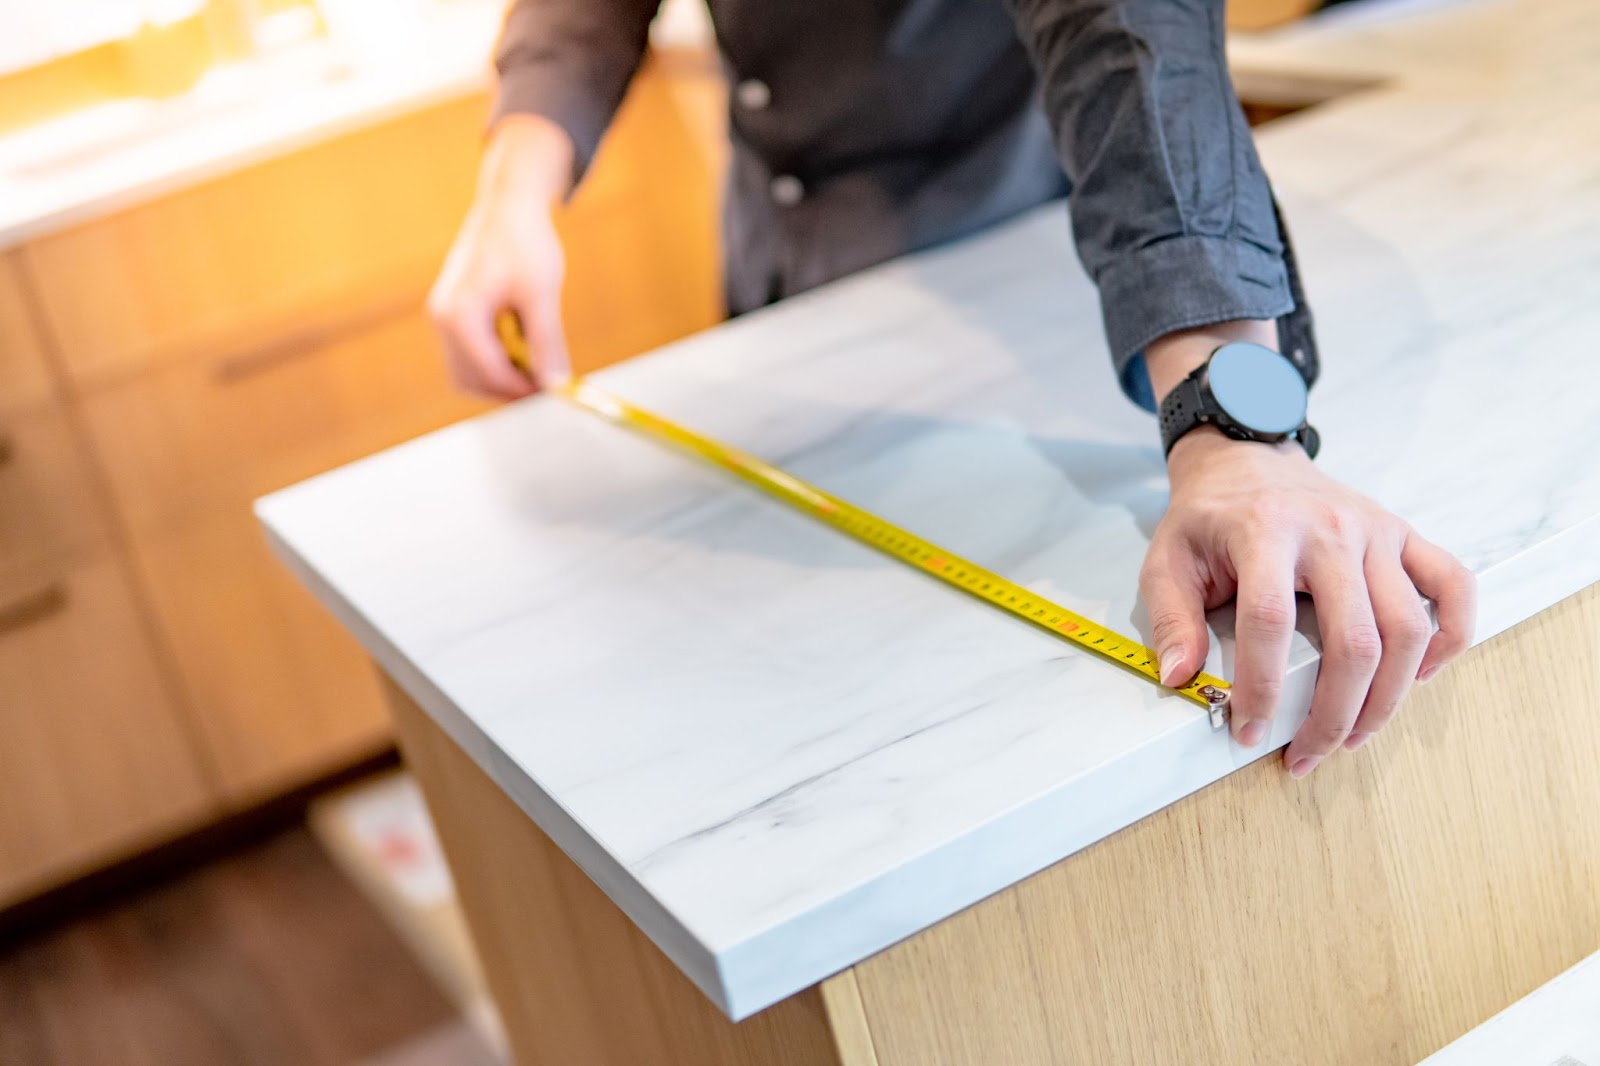 A person measuring a countertop with a ruler at a countertops outlet store considering budget countertops.